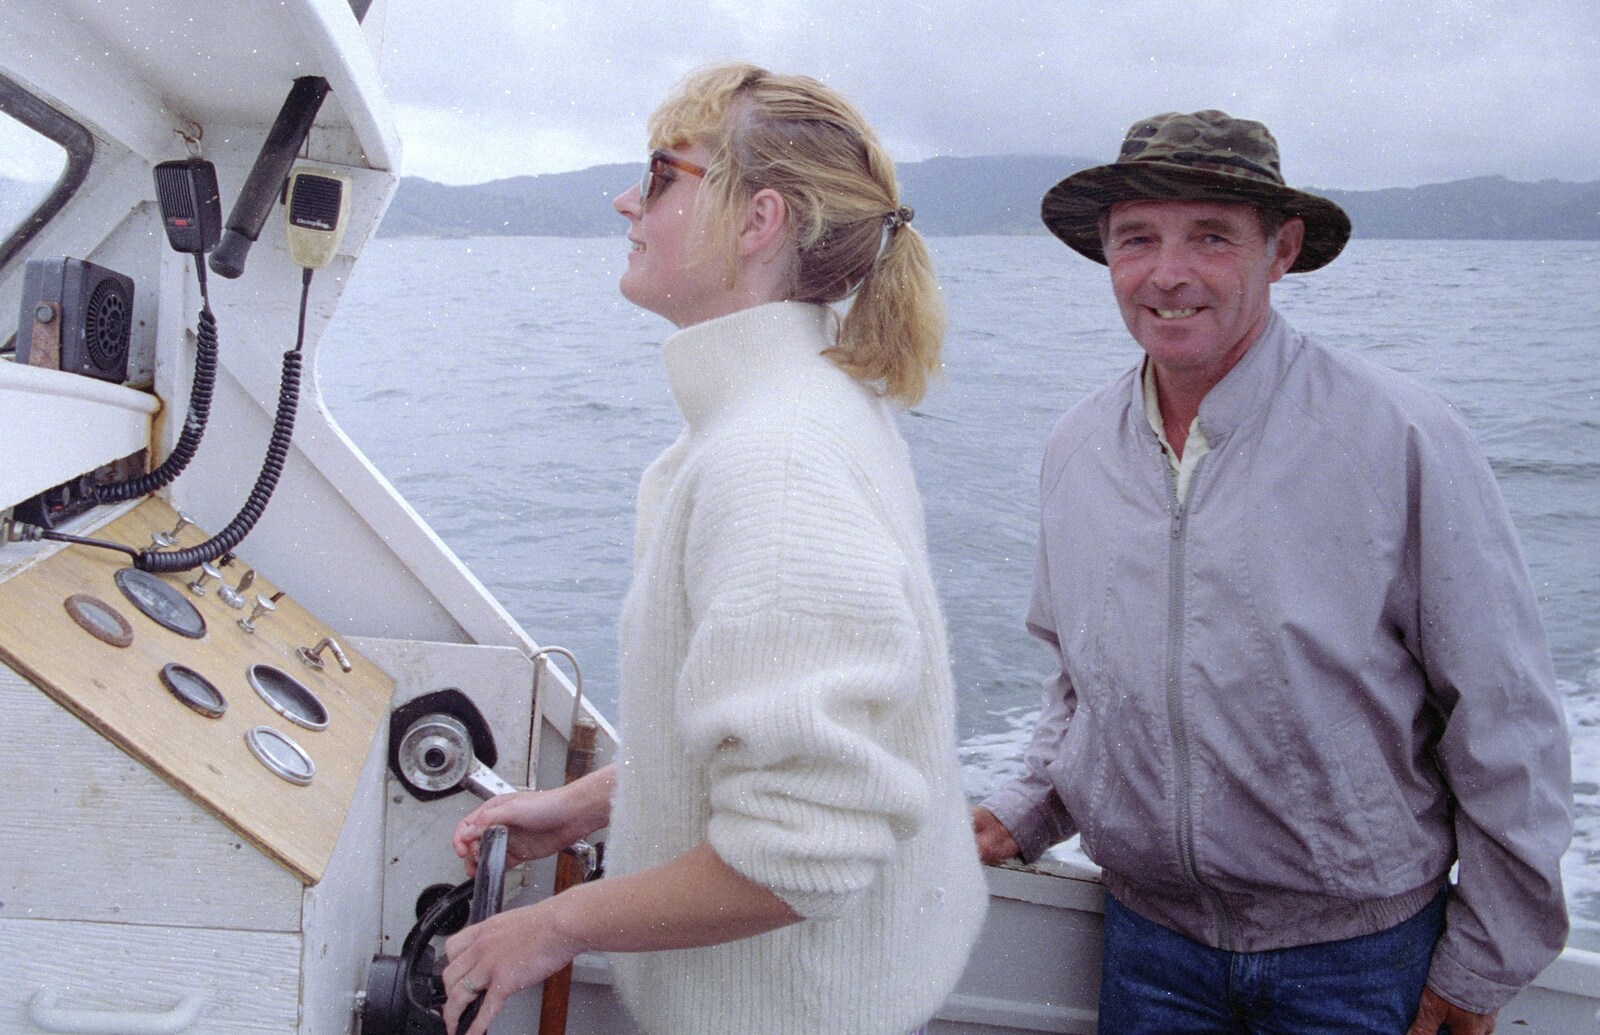 Suzanne takes the helm of the boat from Ferry Landing, Whitianga, New Zealand - 23rd November 1992